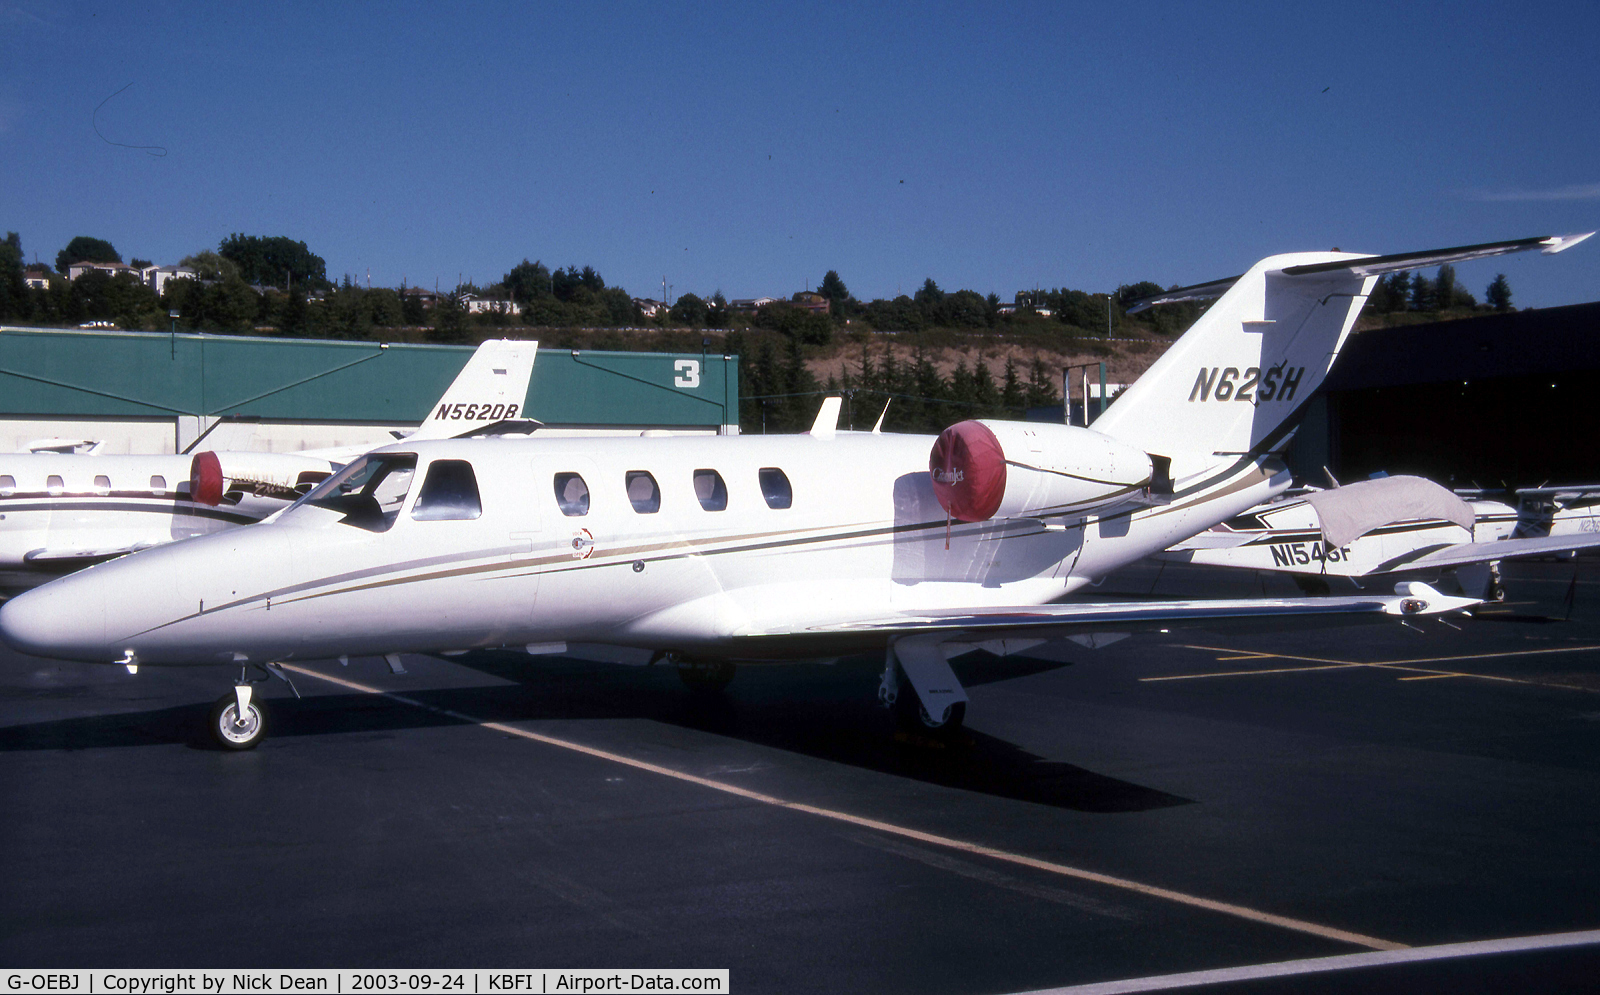 G-OEBJ, 2001 Cessna 525 CitationJet CJ1 C/N 525-0423, KBFI (Seen here as N62SH and currently registered G-OEBJ as posted for C/N accuracy)